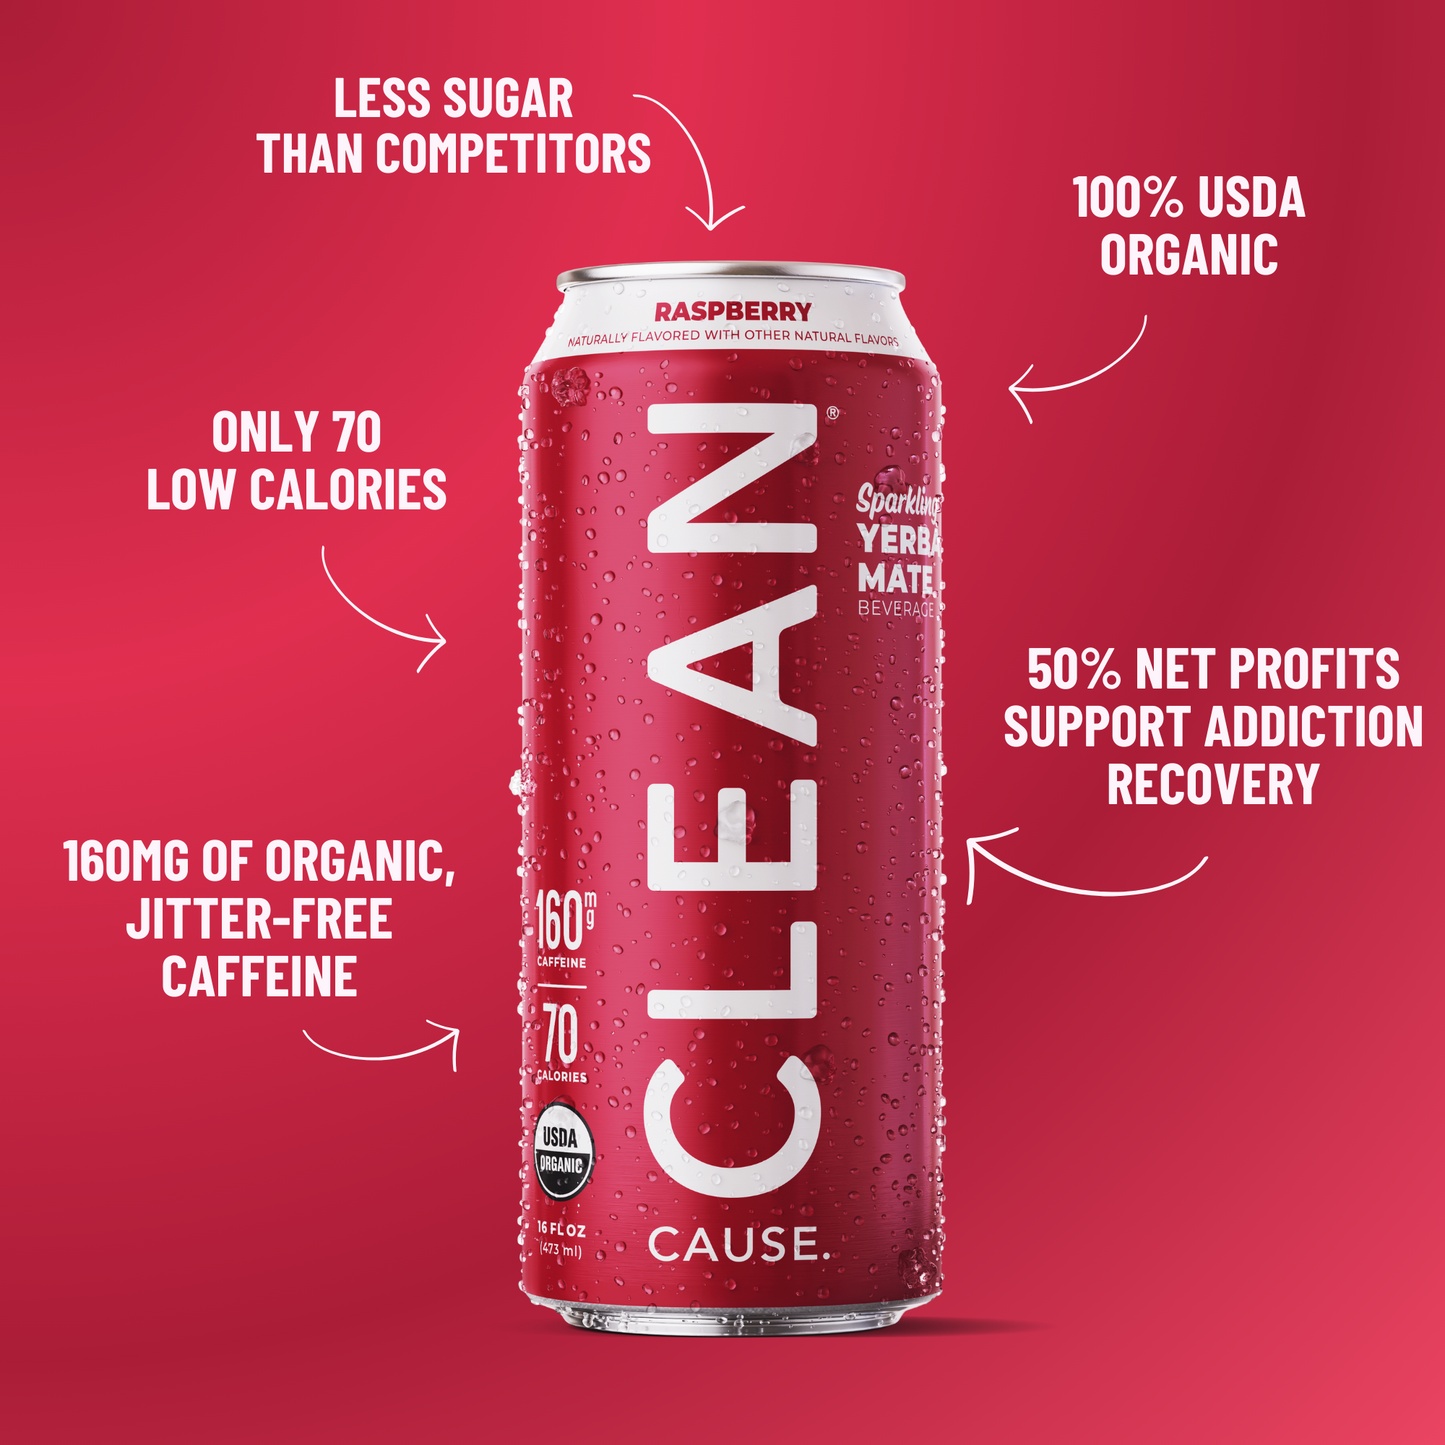 A can of CLEAN Cause Raspberry Yerba Mate with little attributes circling it: 160mg of organic jitter-free caffeine, only 70 calories, less sugar than competitors, 100% USDA organic, 50% net profits support addiction recovery